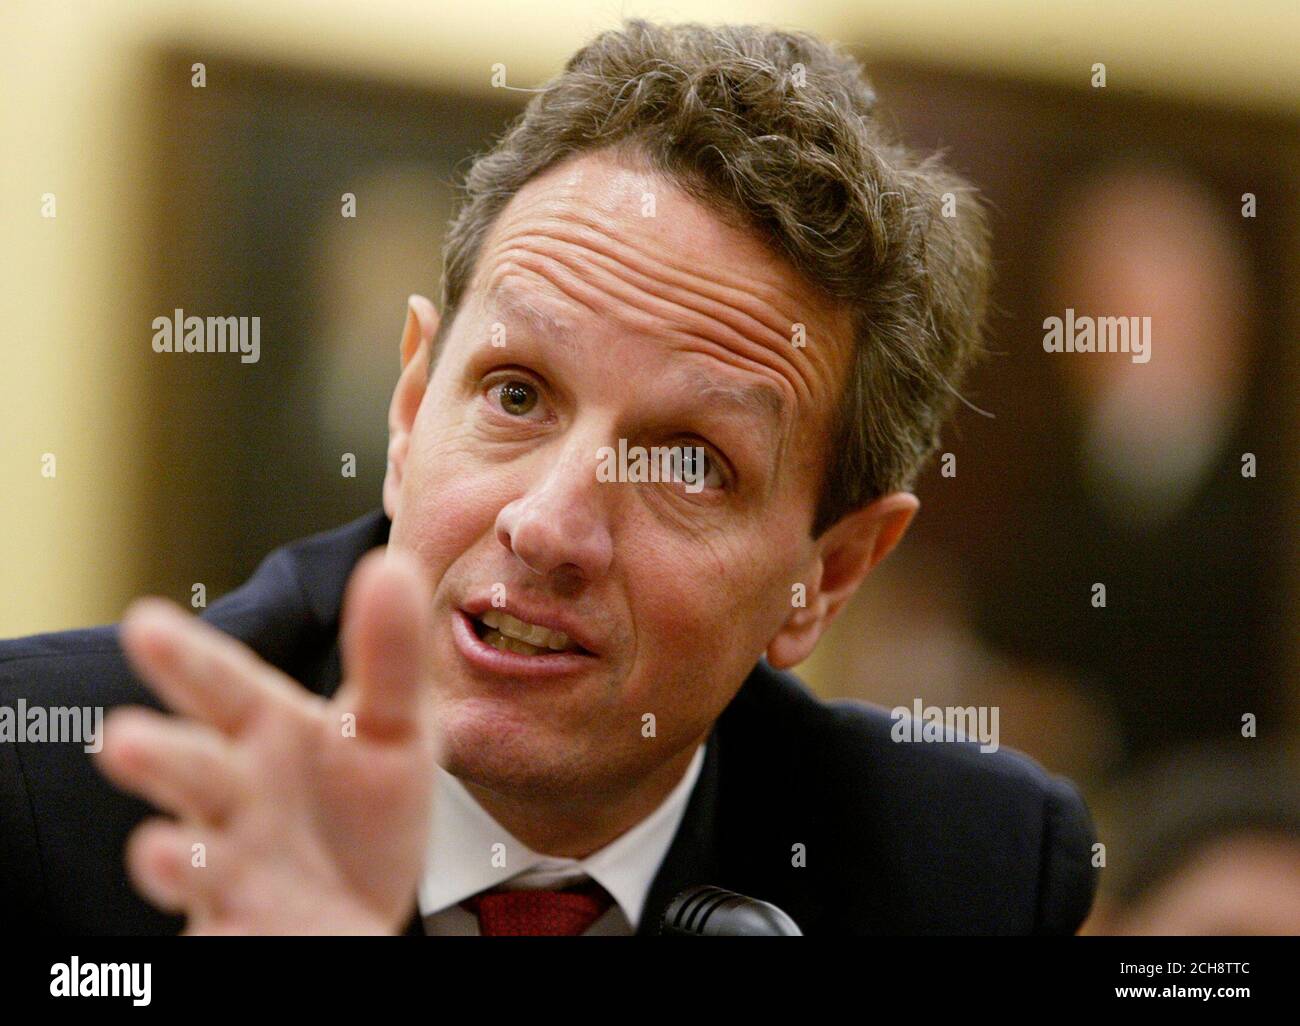 U.S. Treasury Secretary Timothy Geithner testifies about the Obama administration's budget proposals and goals for economic recovery and reform before the House Appropriations Subcommittee on General Government and Financial Services on Capitol Hill in Washington, May 21, 2009. Geithner said that a bailout for banks was steadying the financial system but care must be taken to ensure that normal market forces are allowed to operate.  REUTERS/Jim Bourg   (UNITED STATES POLITICS BUSINESS) Stock Photo